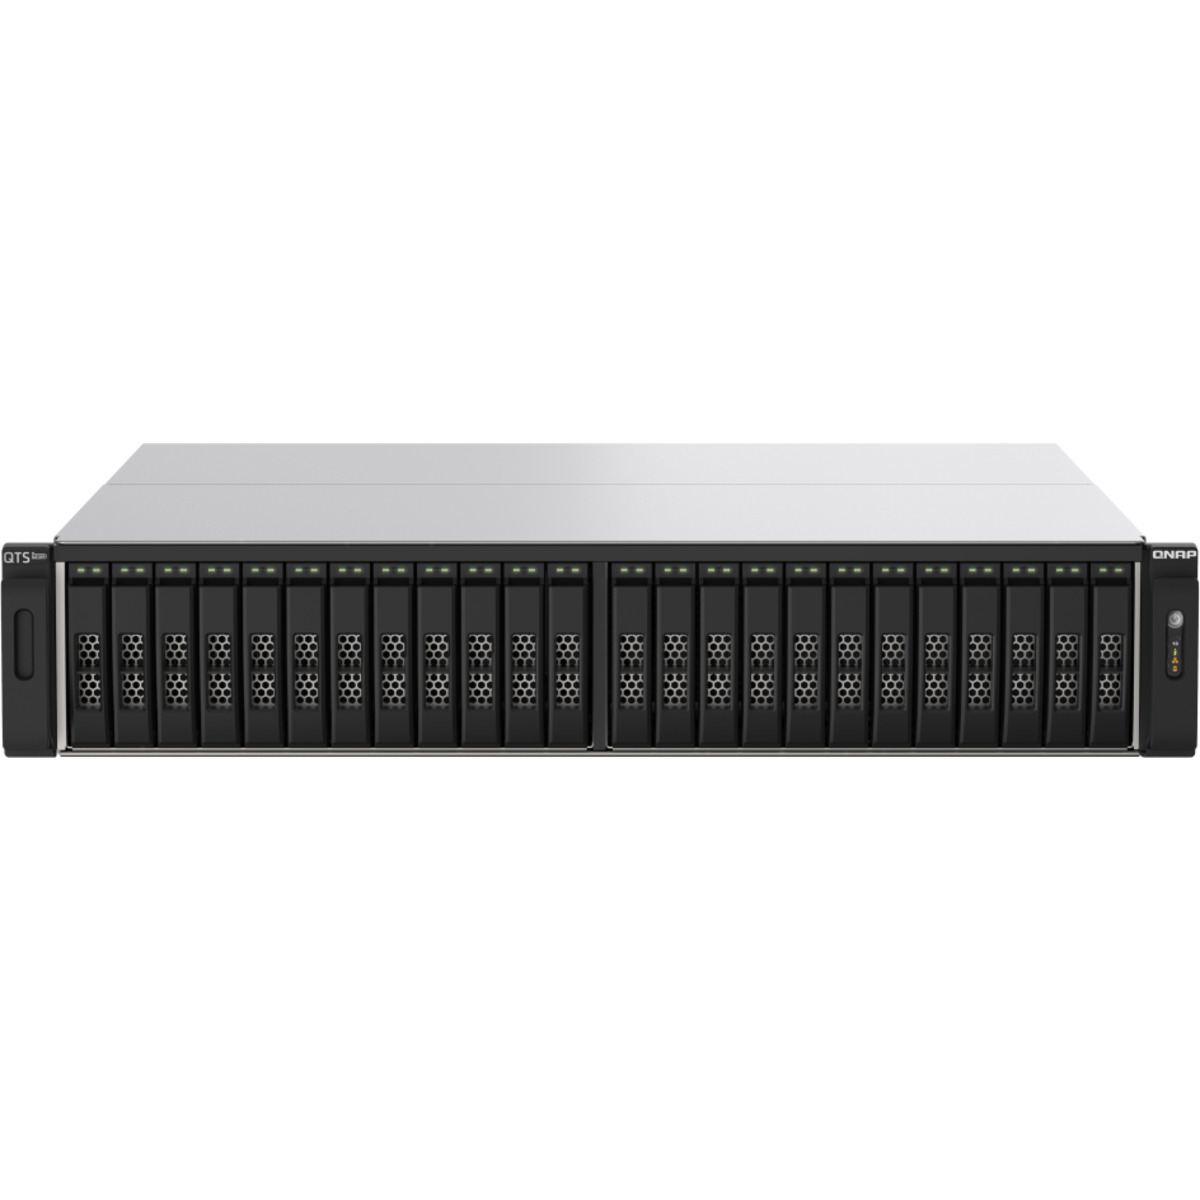 QNAP TS-h2490FU-7232P 20tb 24-Bay RackMount Large Business / Enterprise NAS - Network Attached Storage Device 20x1tb Sabrent Rocket 4 Plus SB-RKT4P-1TB  7000/5800MB/s M.2 2280 NVMe SSD CONSUMER Class Drives Installed - Burn-In Tested TS-h2490FU-7232P